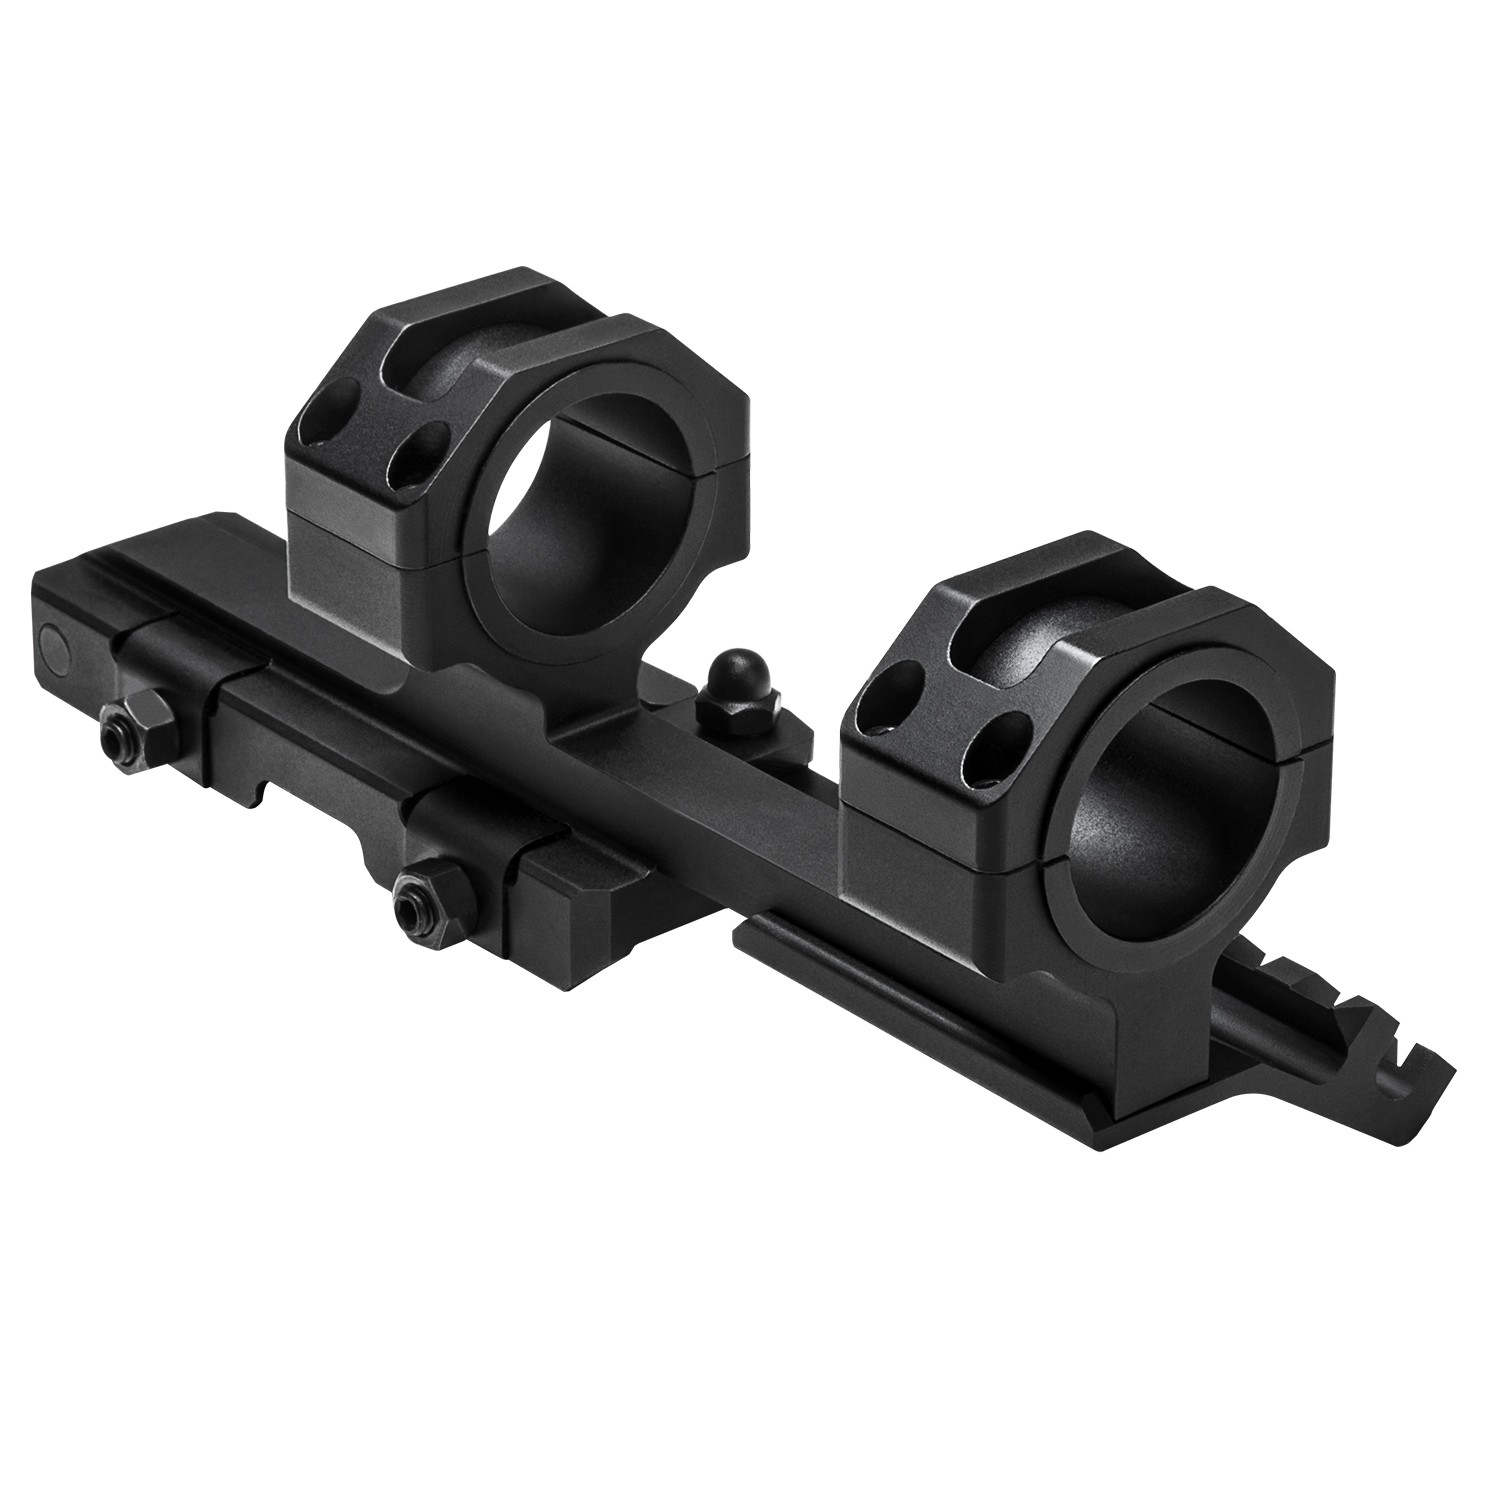 Details about   Vism SPR Red Dot Scope and Scope Mount Combo ~ New 